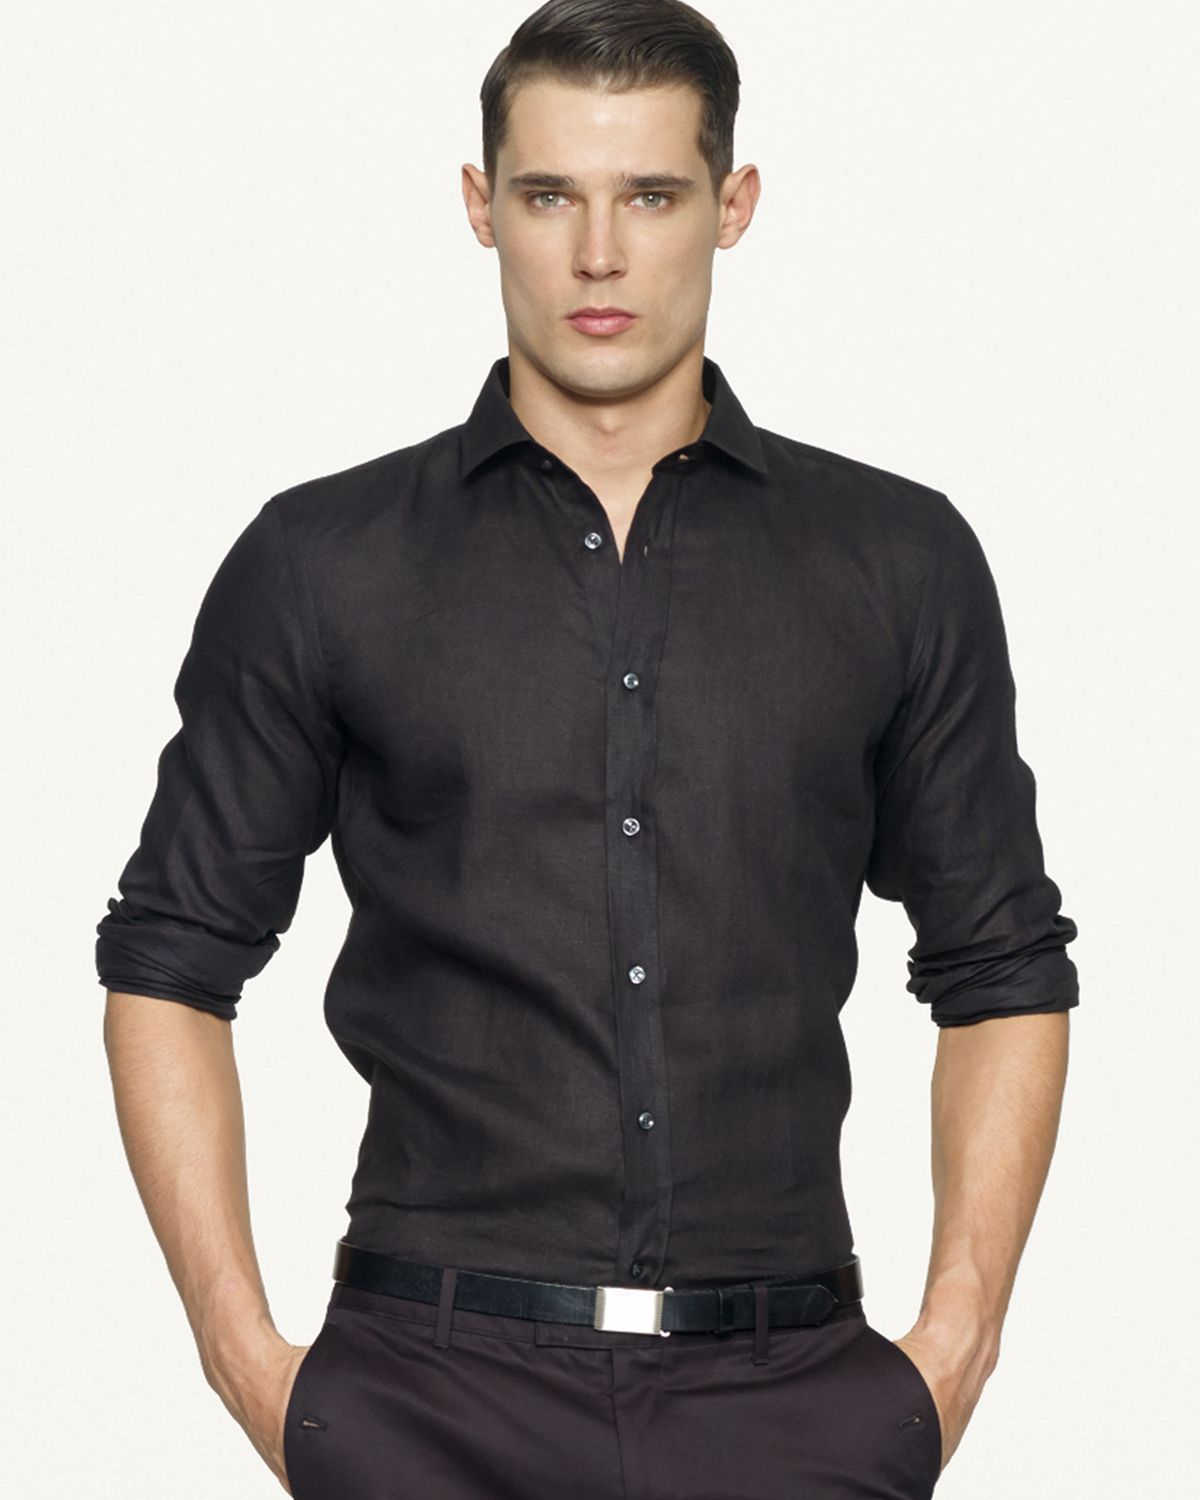 the perfectly tailored shirts evmieob